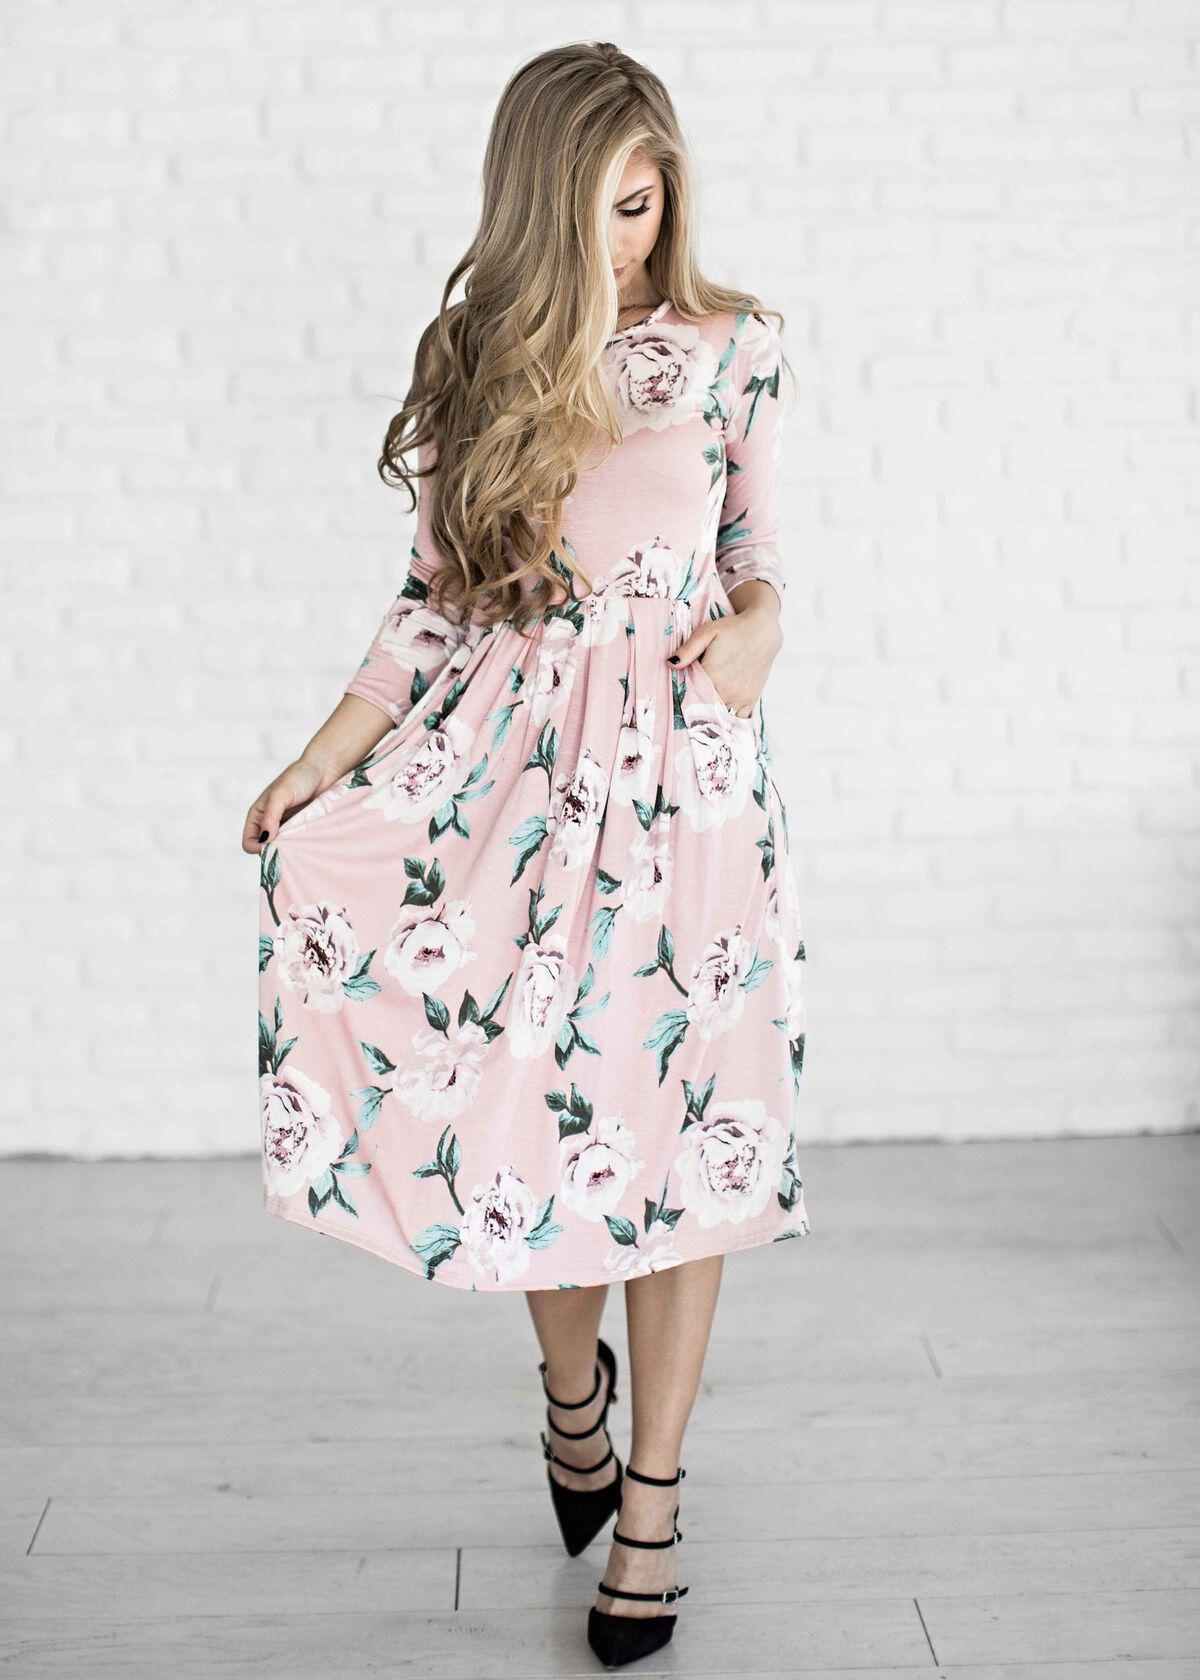 Easter Outfits For Church Dresses Images 2022 